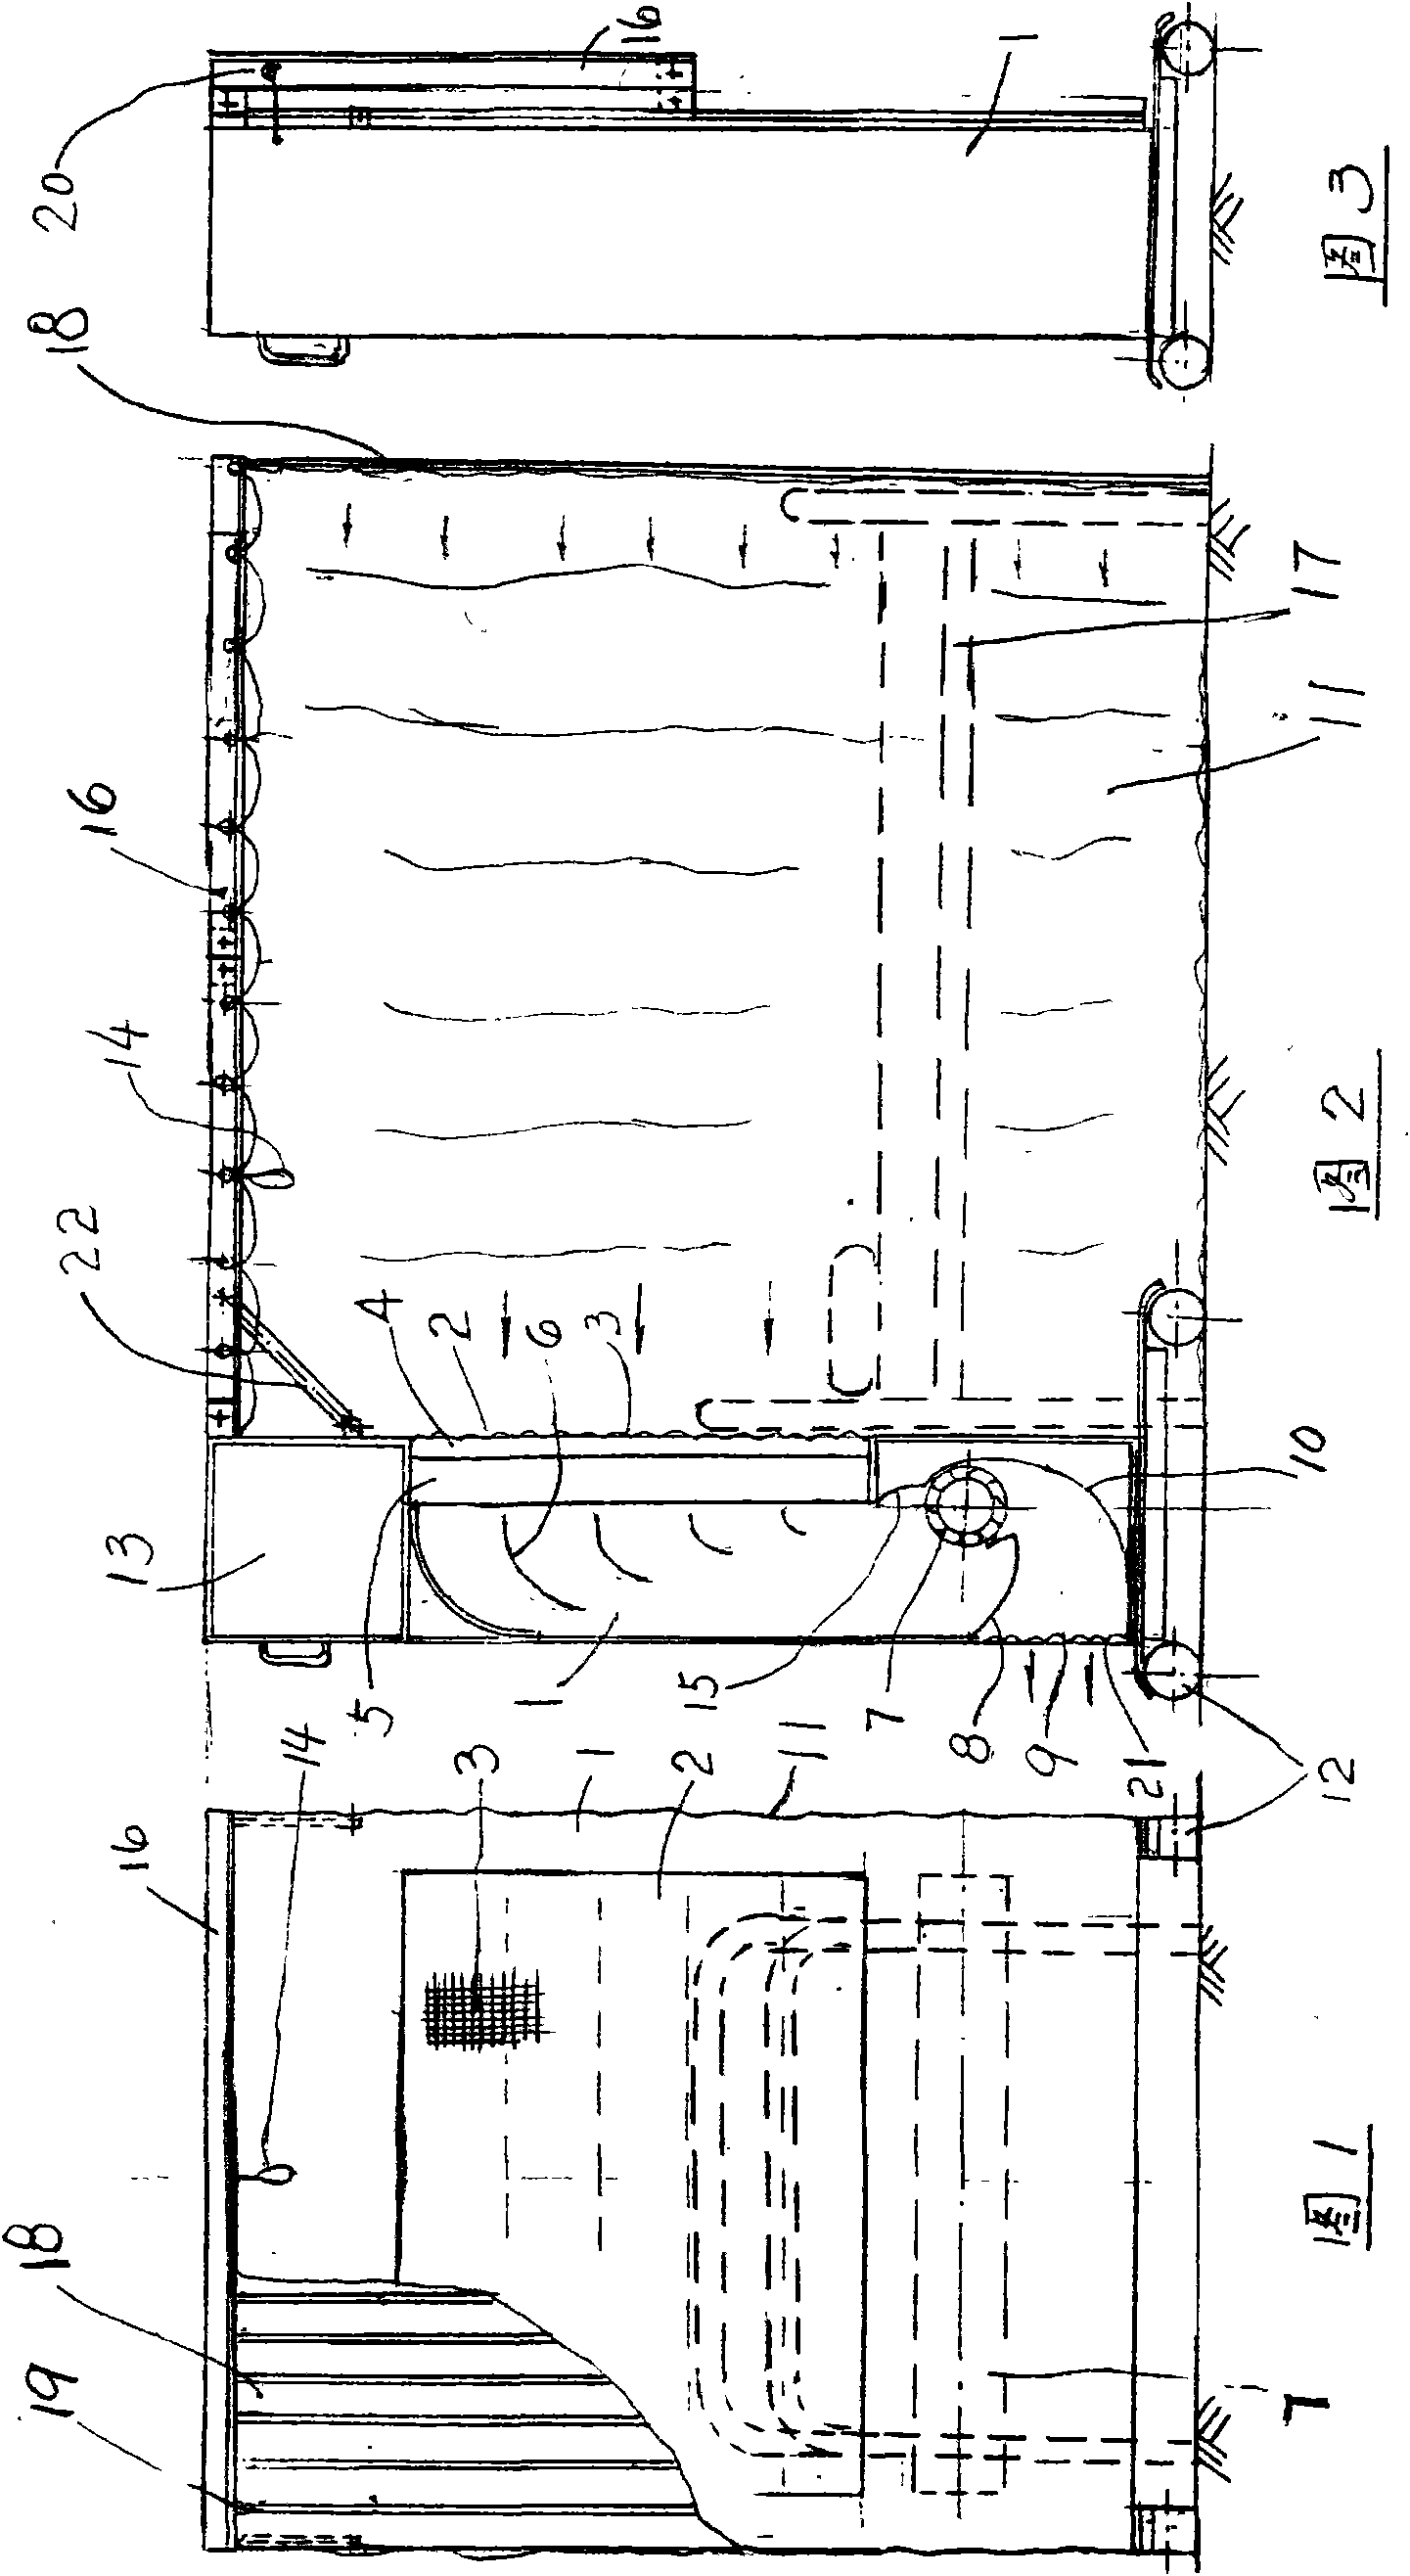 Simple low-noise negative pressure isolation ward device